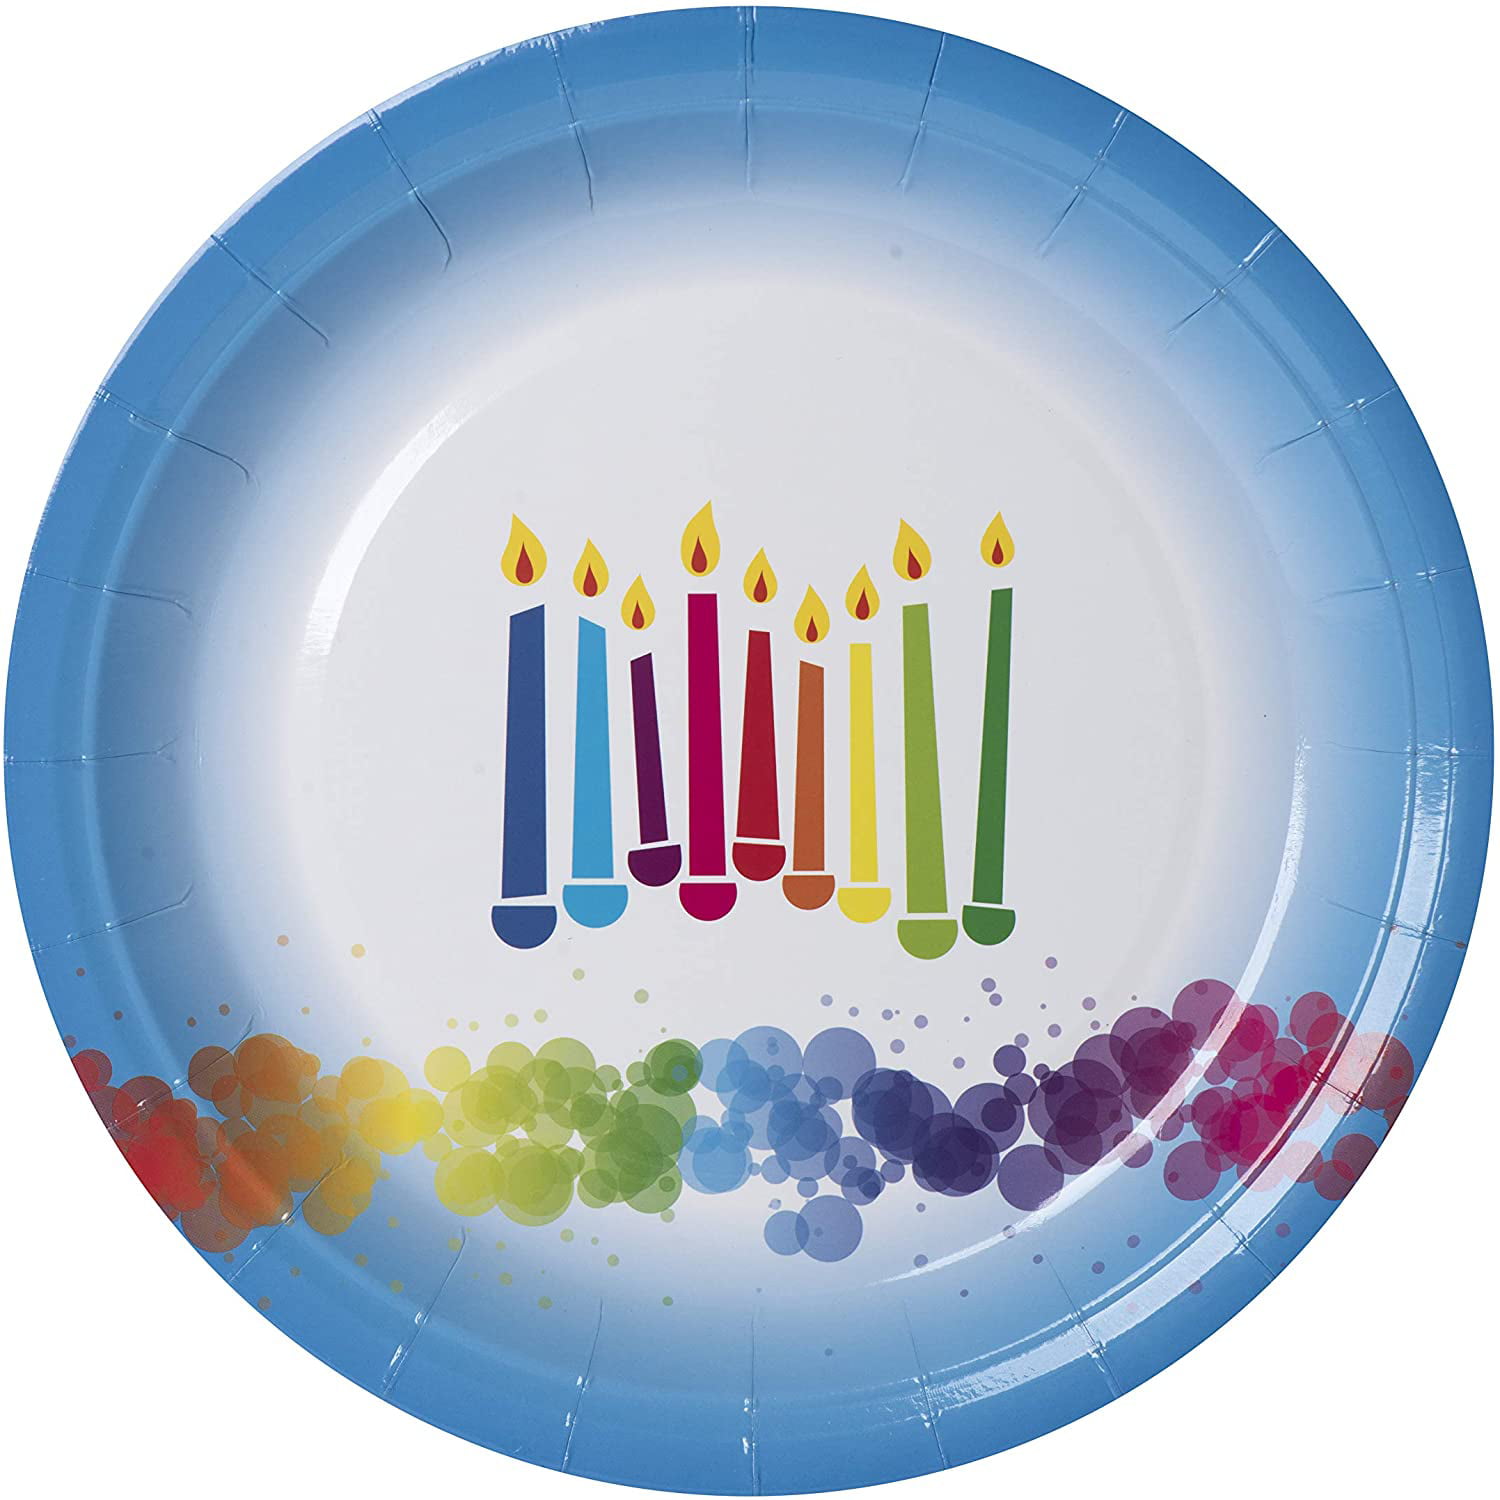 Pack of 10 Pcs |Ideal Practical Design for Parties Chanukah Themed 9 Plates Round Paper Party Plates Hanukkah Disposable Paper Plates Family Dinner and Mess free Chanukah Parties and Festival